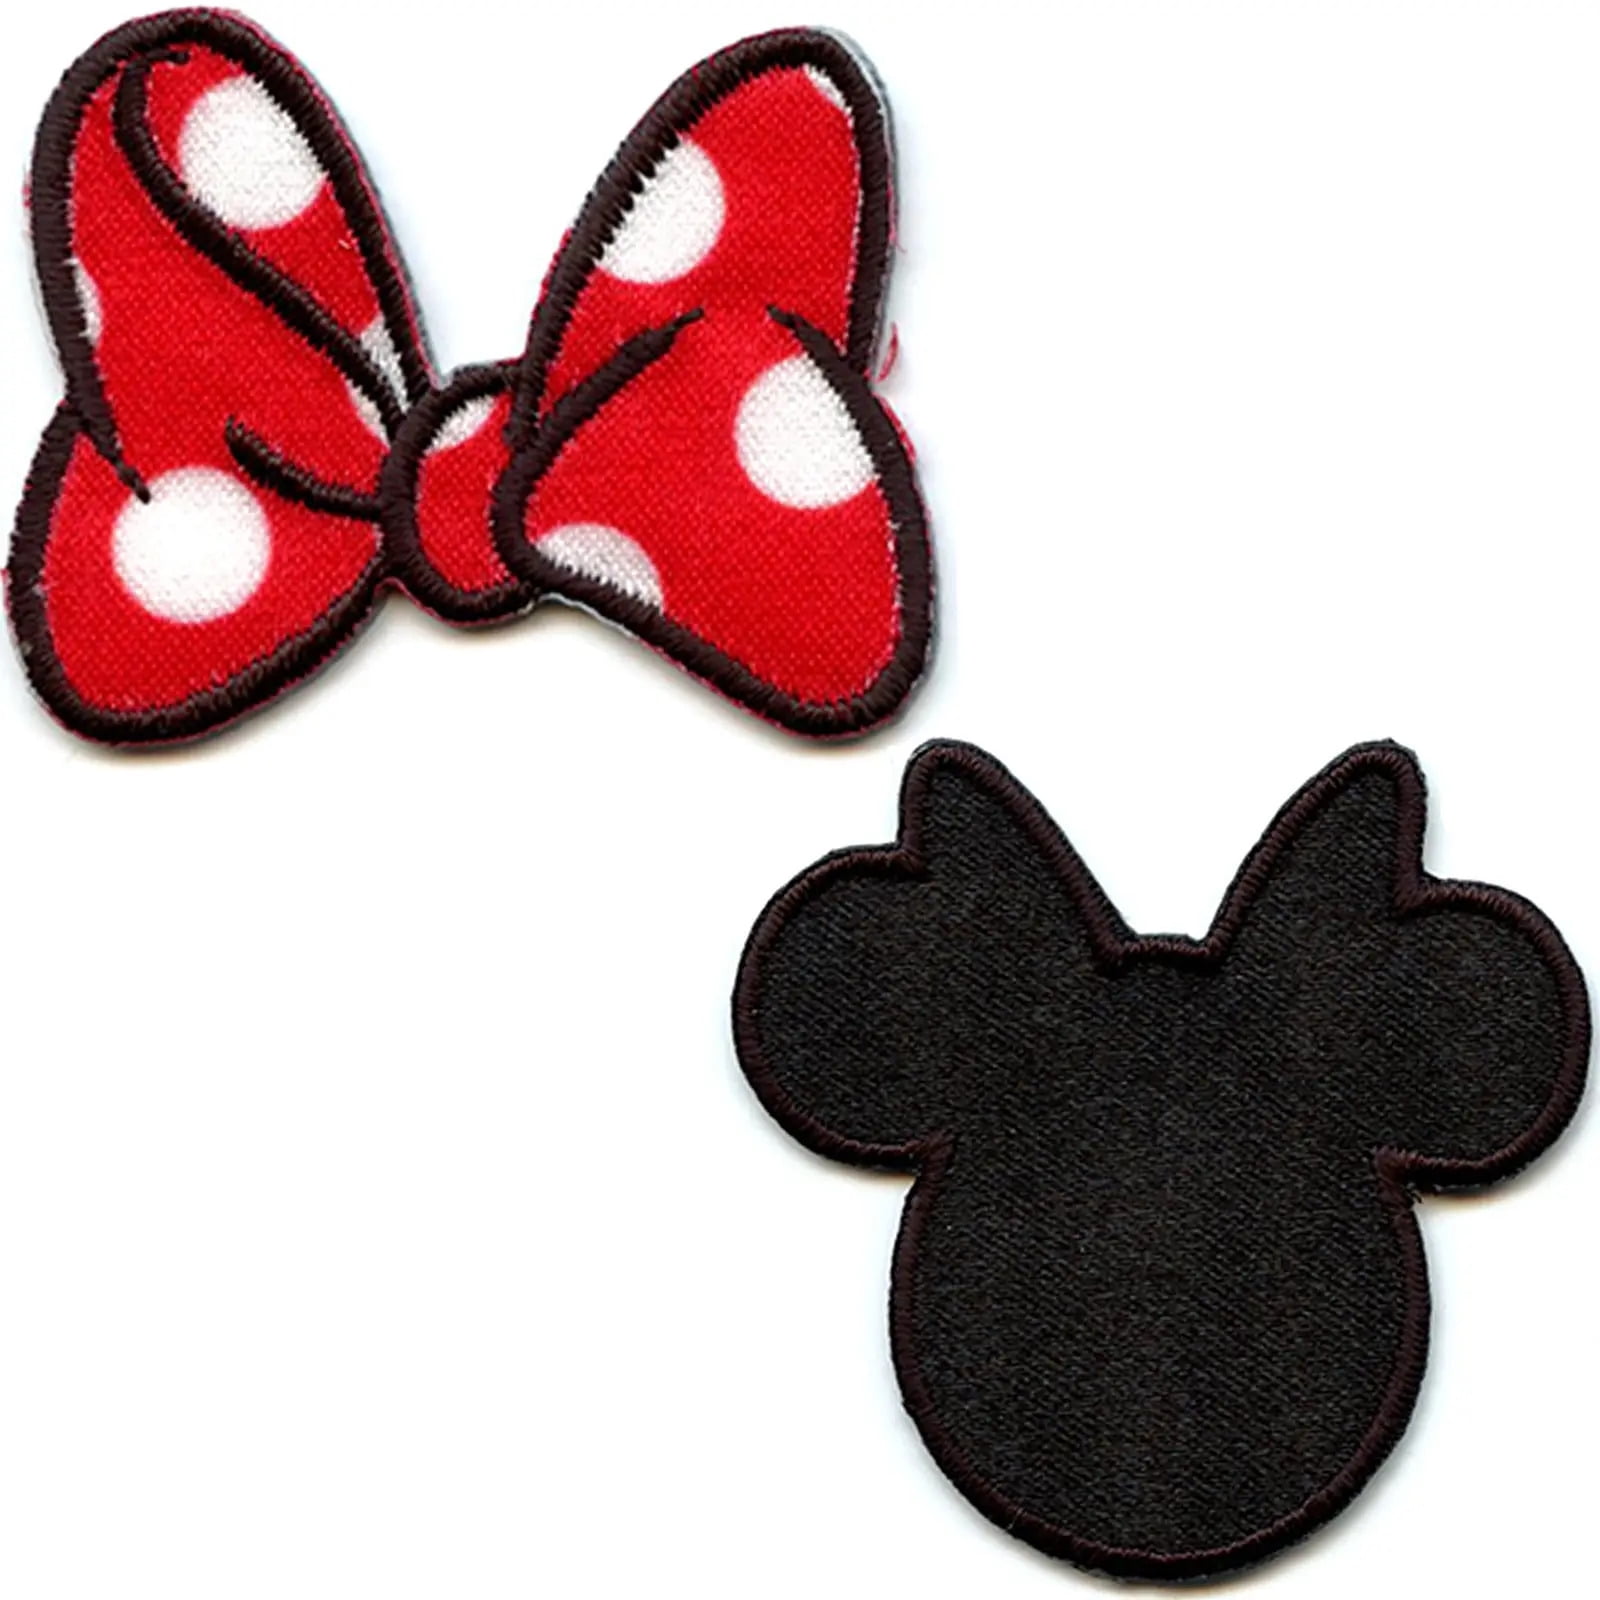 Minnie Patches iron on Disney patches iron on patch patches for Jackets